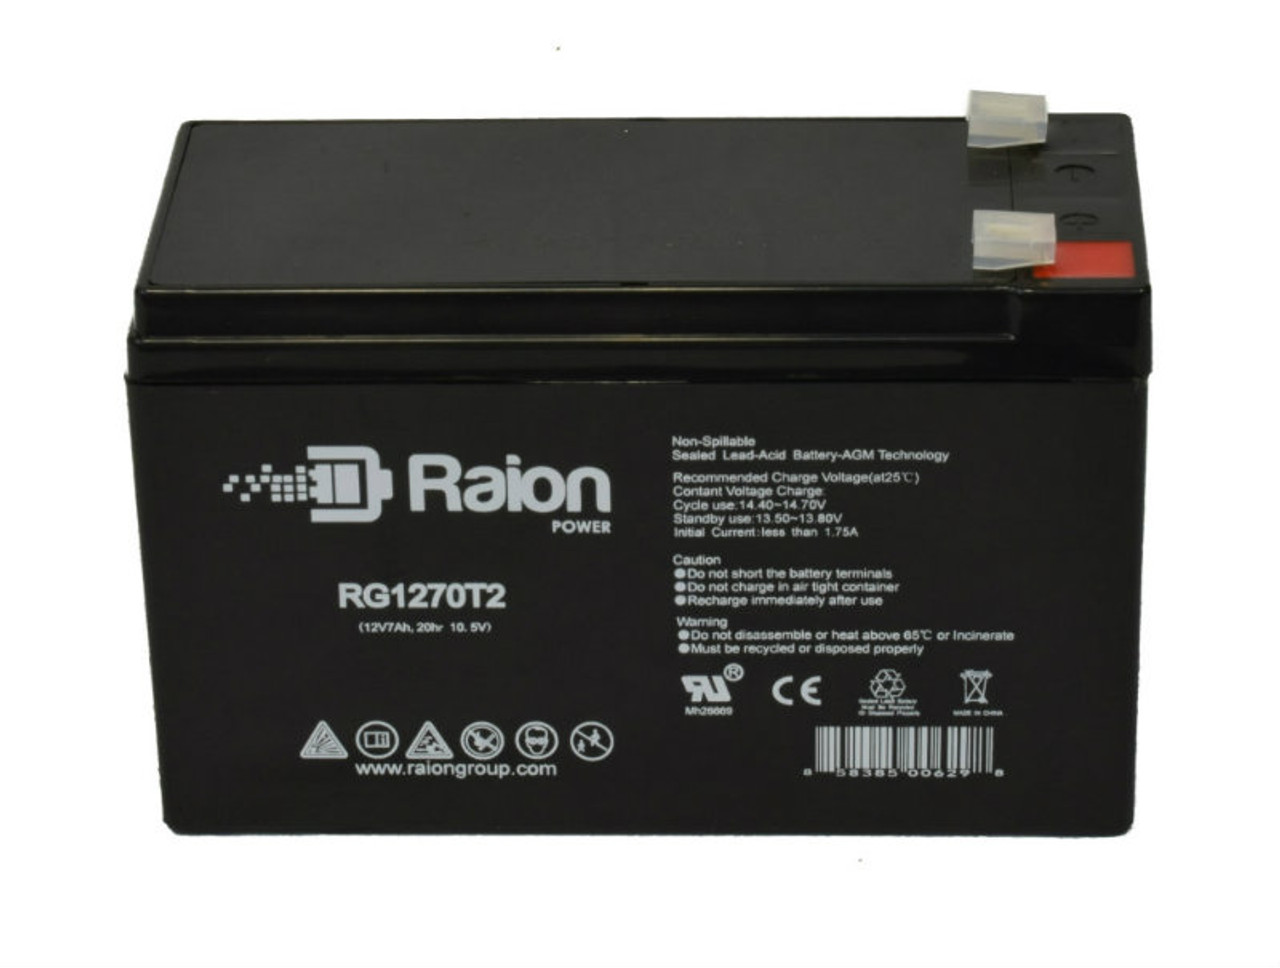 Raion Power RG1270T2 12V 7Ah Lead Acid Battery for Stannah Siena 260 Curved Stairlift